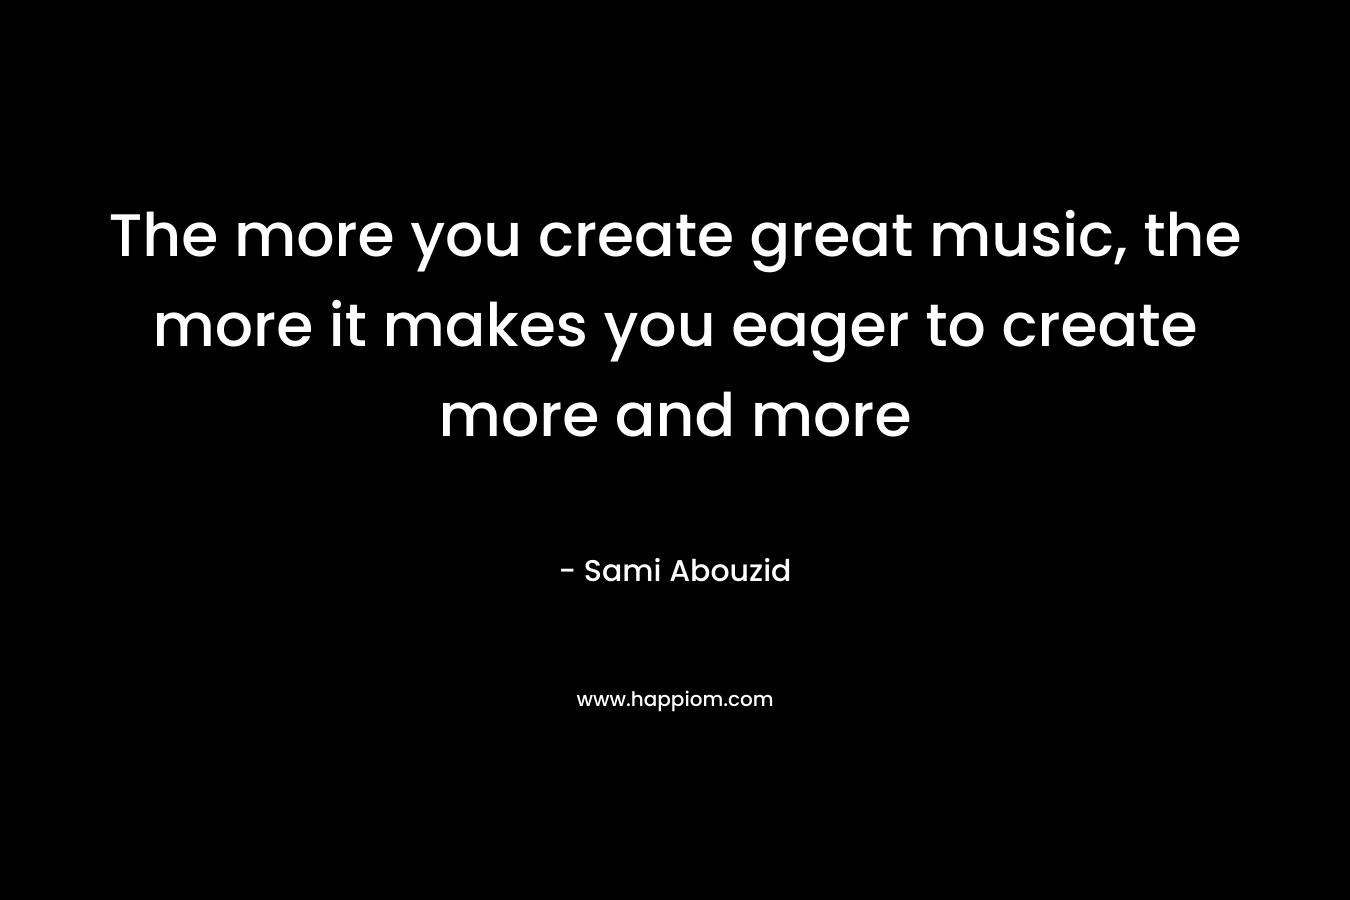 The more you create great music, the more it makes you eager to create more and more